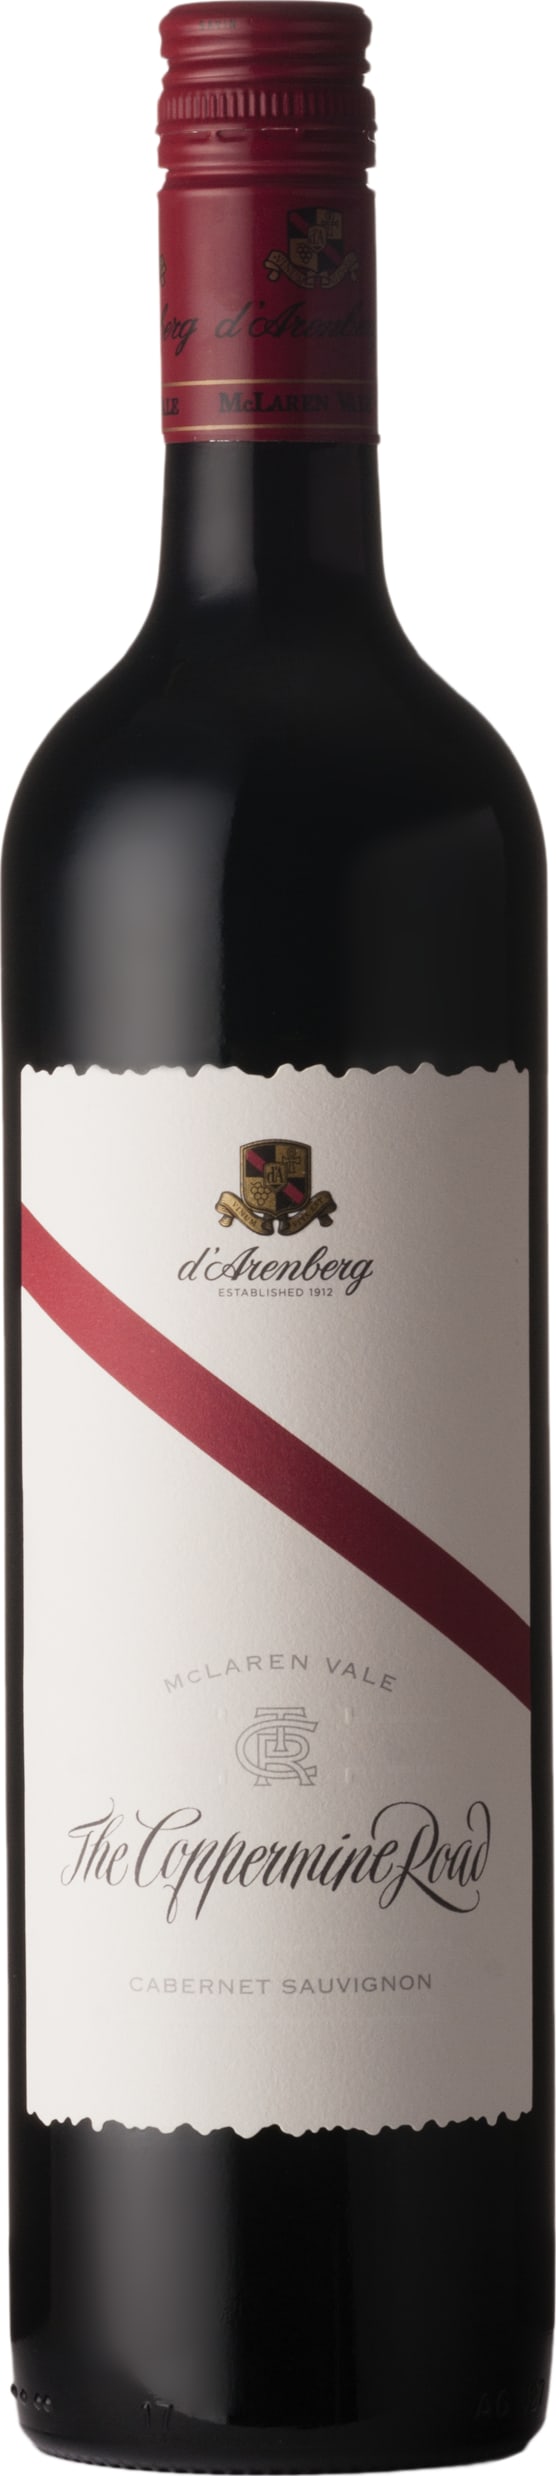 D Arenberg The Coppermine Road Cabernet Sauvignon 2013 75cl - Buy D Arenberg Wines from GREAT WINES DIRECT wine shop